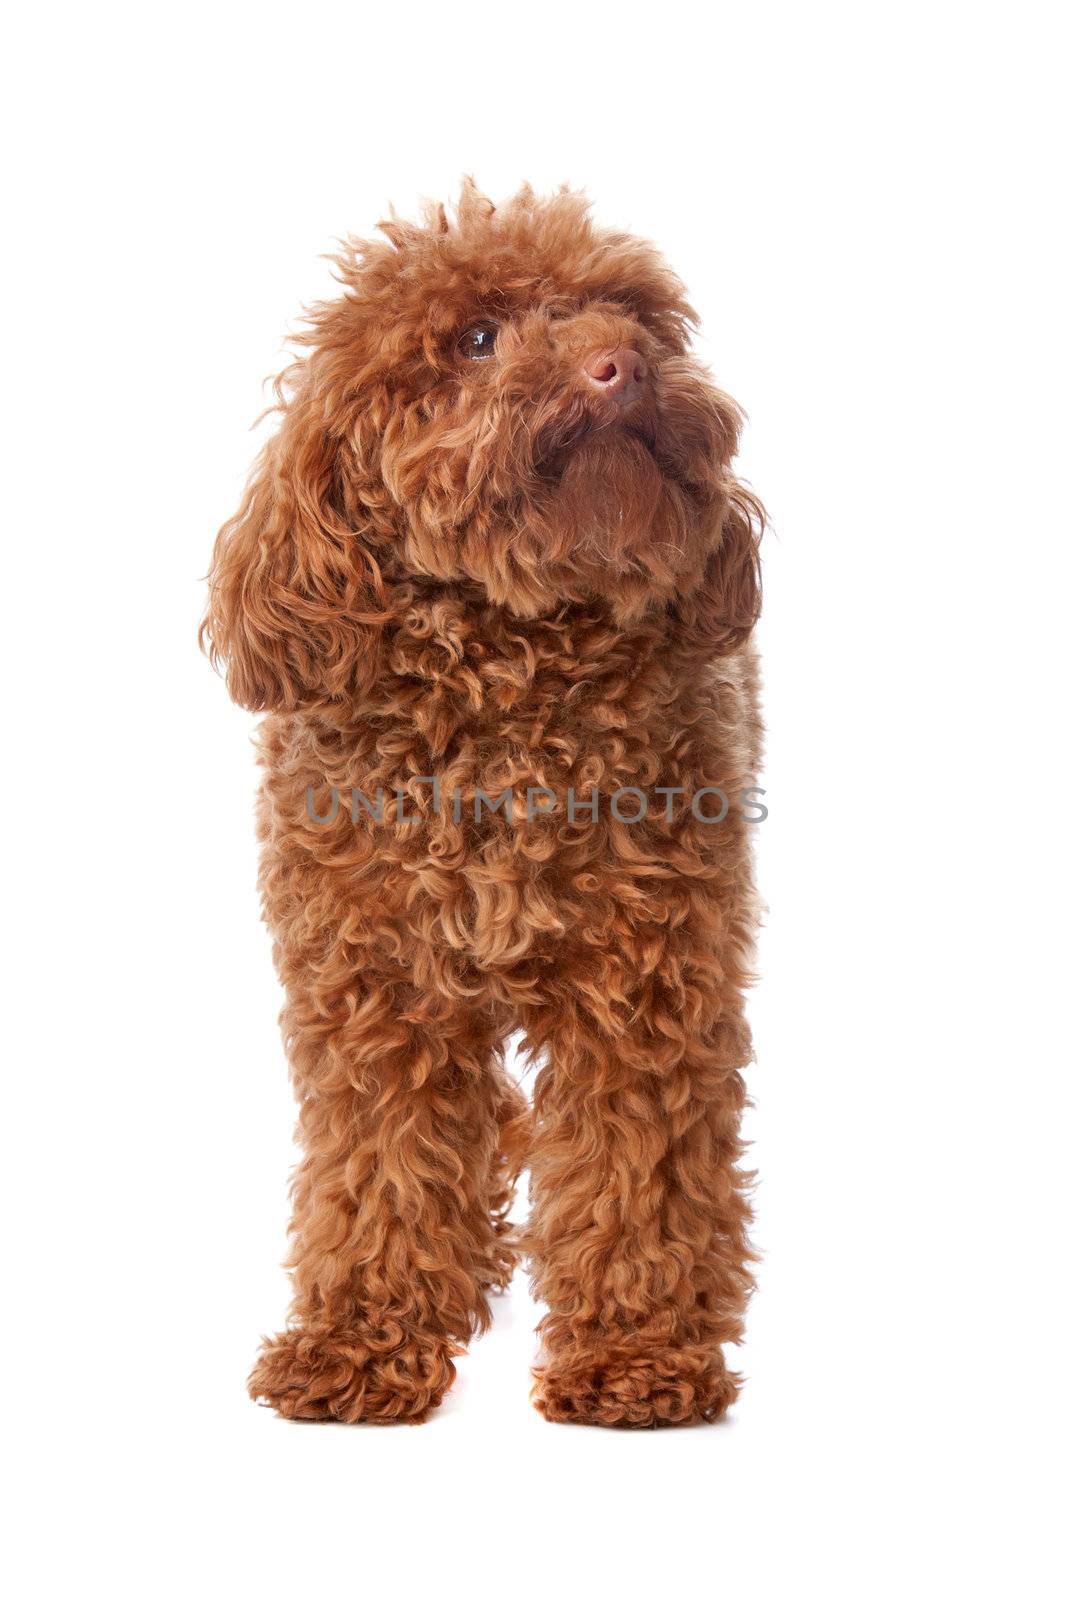 Brown toy poodle by eriklam